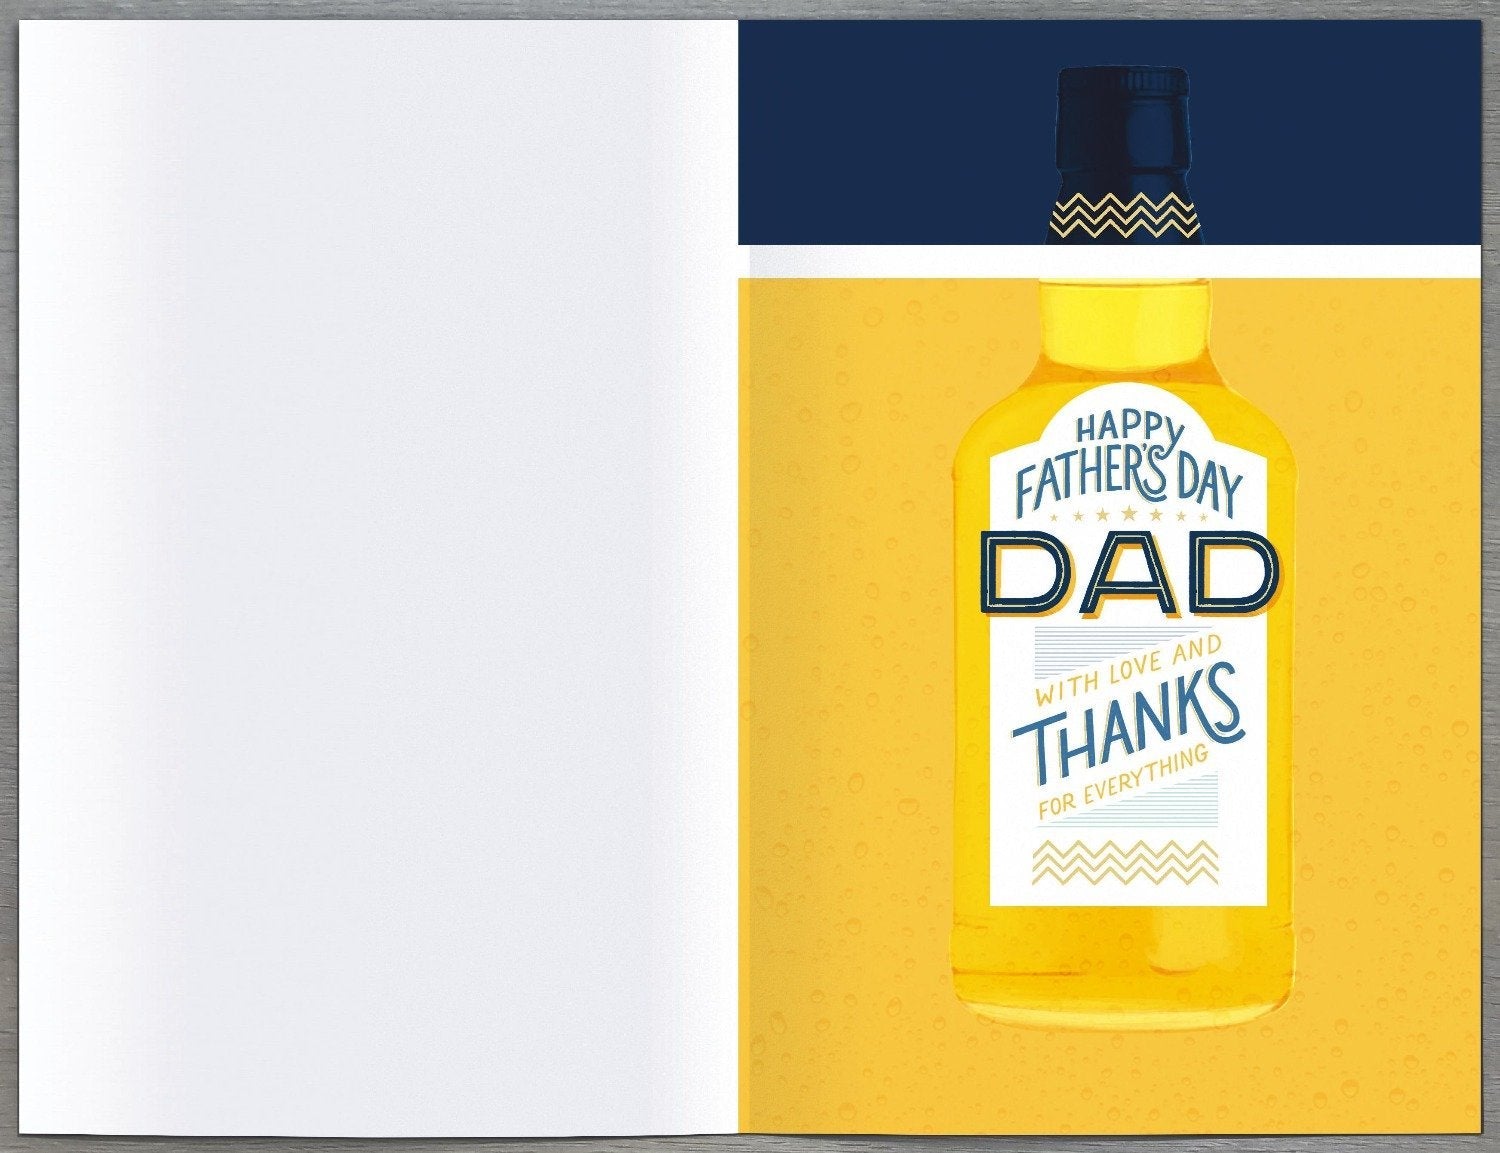 Fathers Day Card - Dad From Both Of Us / A Bottle Of Beer On A Blue Front